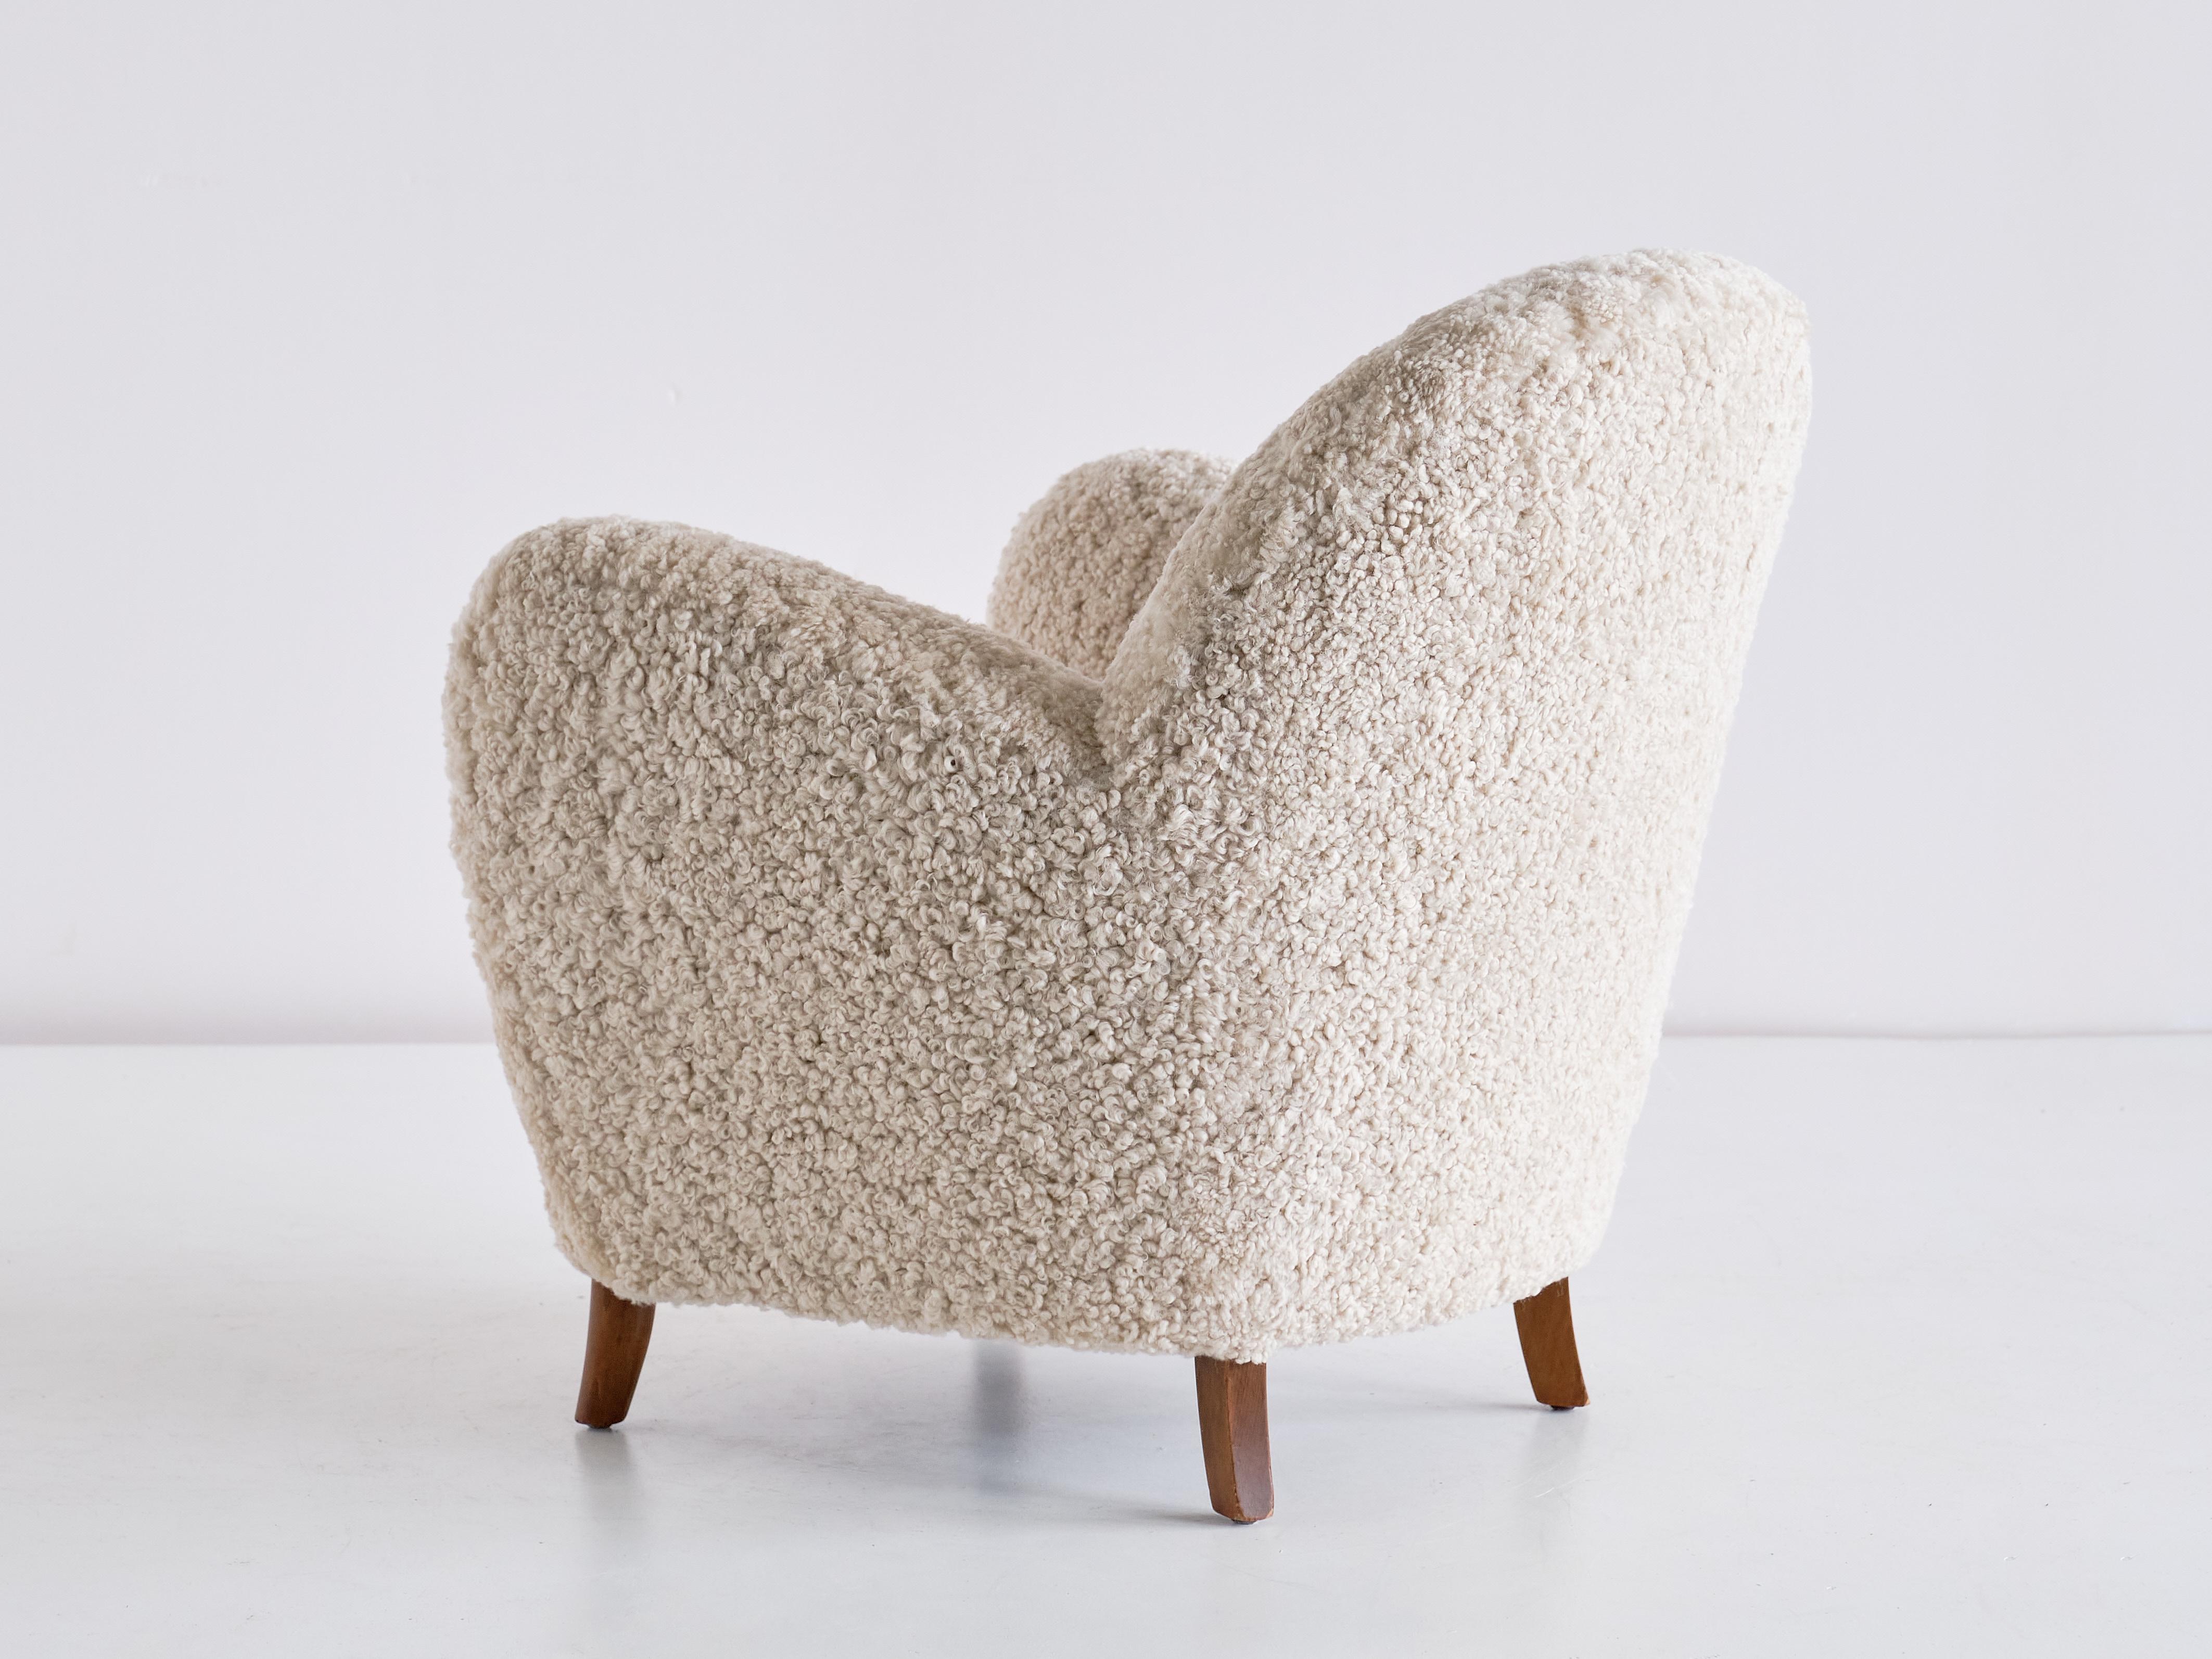 Pair of Thorald Madsen Armchairs in Sheepskin and Beech, Denmark, Mid 1930s For Sale 6